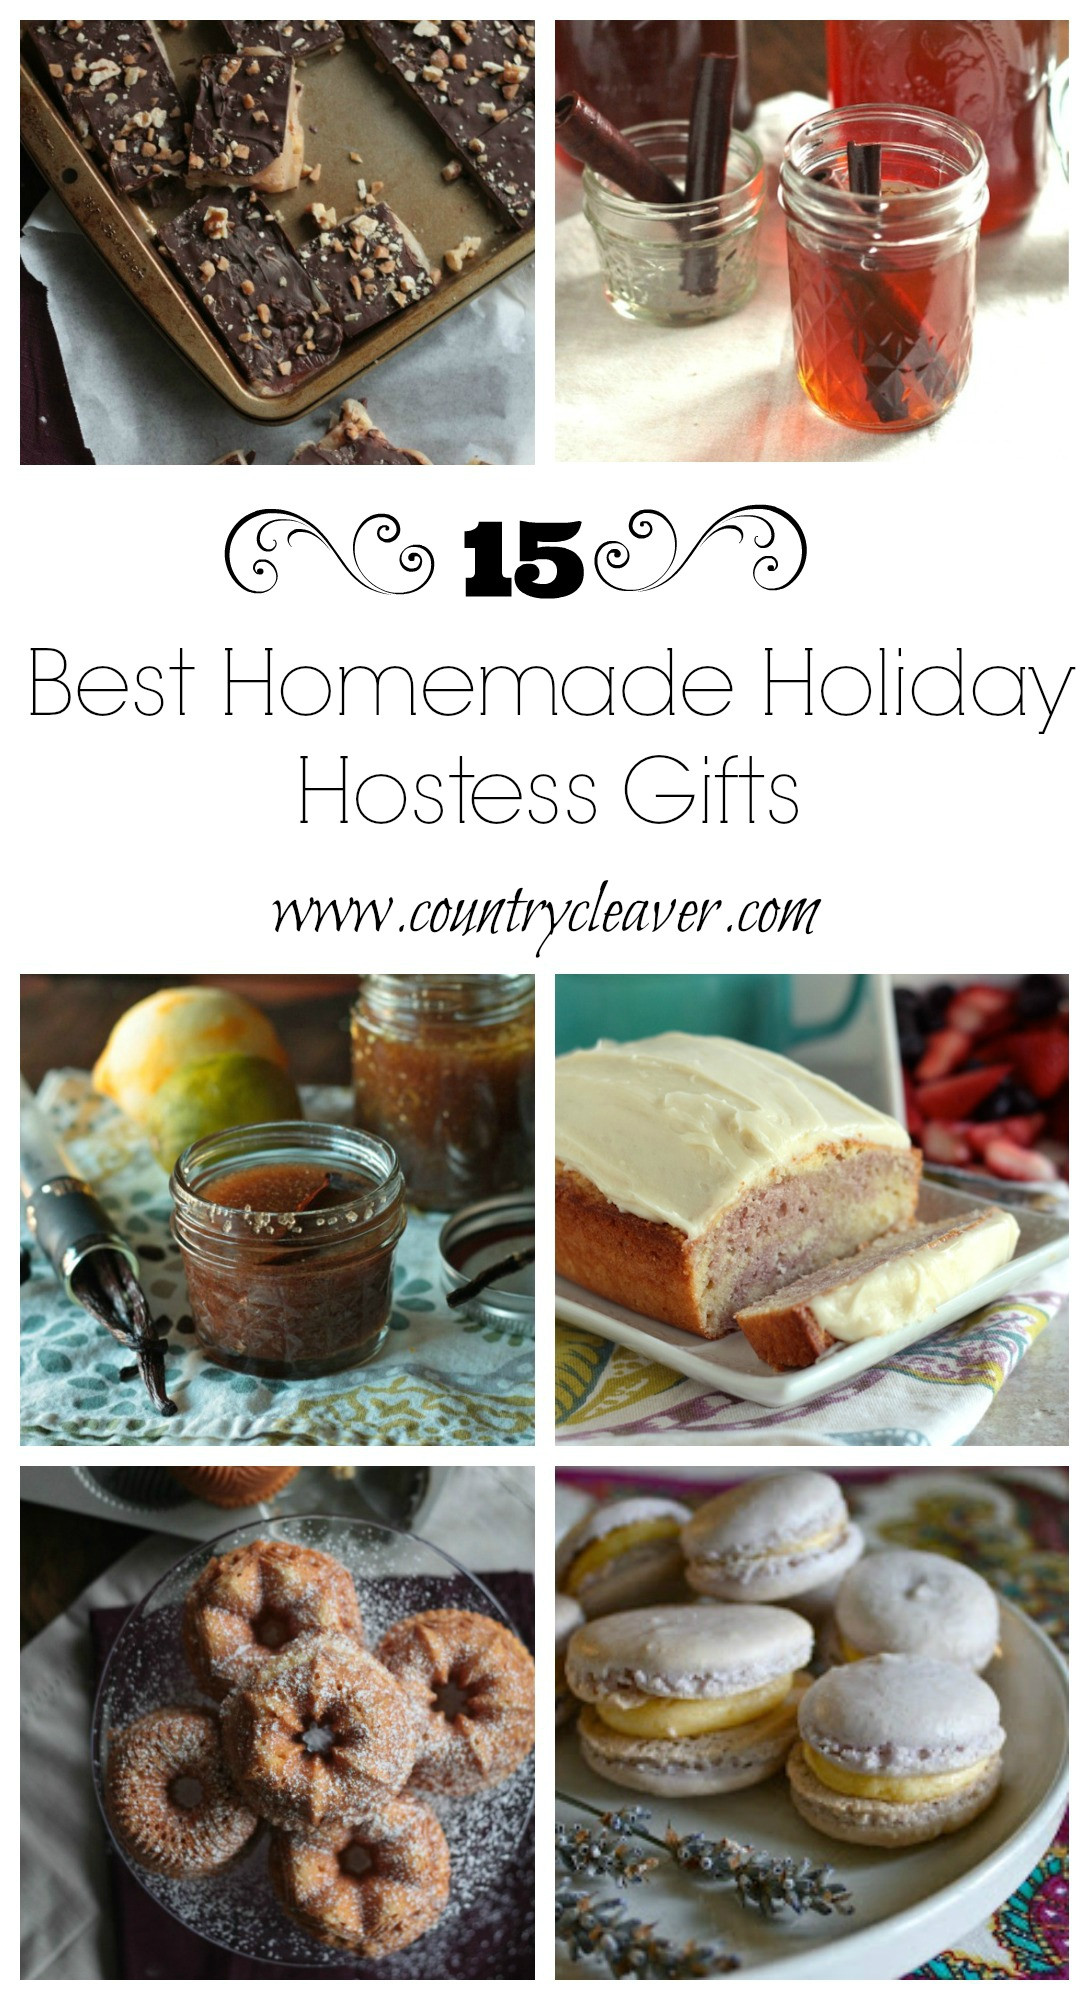 Hostess Gift Ideas For Holiday Party
 15 Best Homemade Holiday Hostess Gifts Country Cleaver